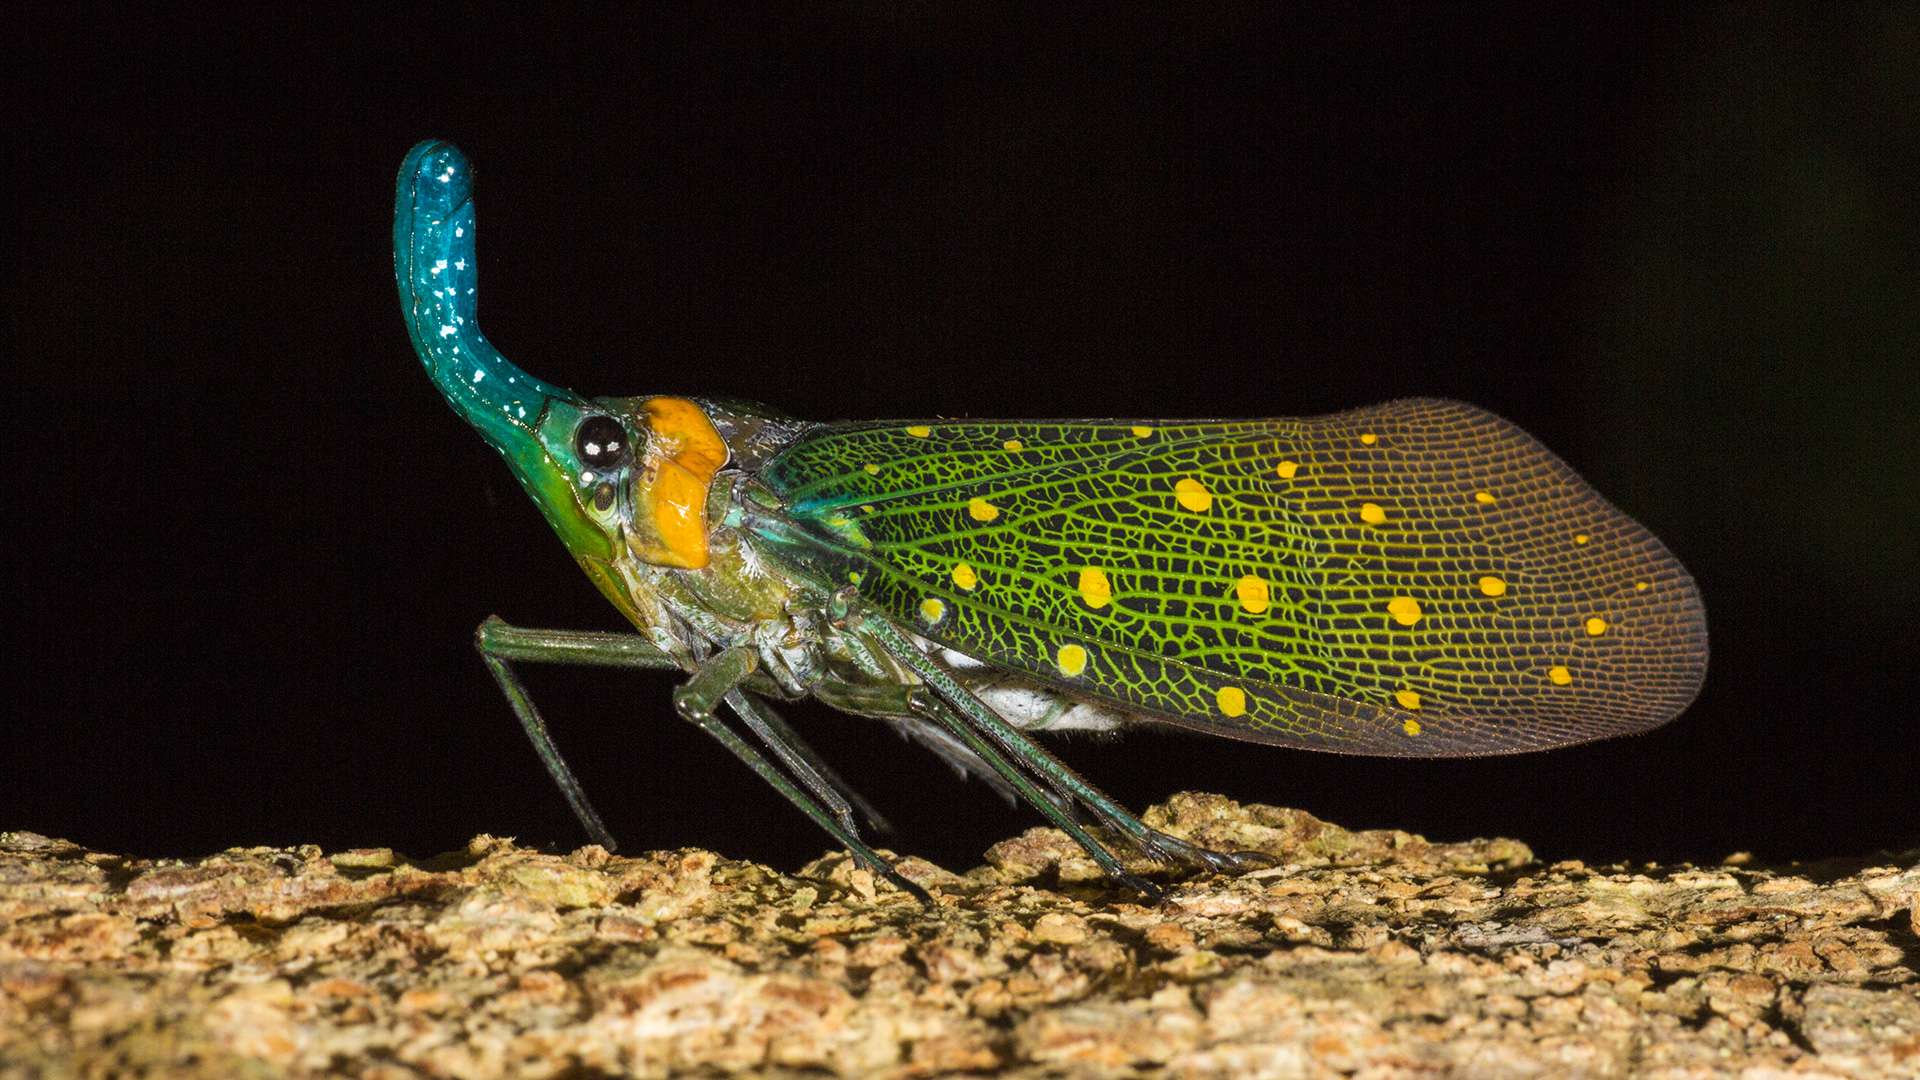 Gilles Martin's photograph of a pyrops from Borneo